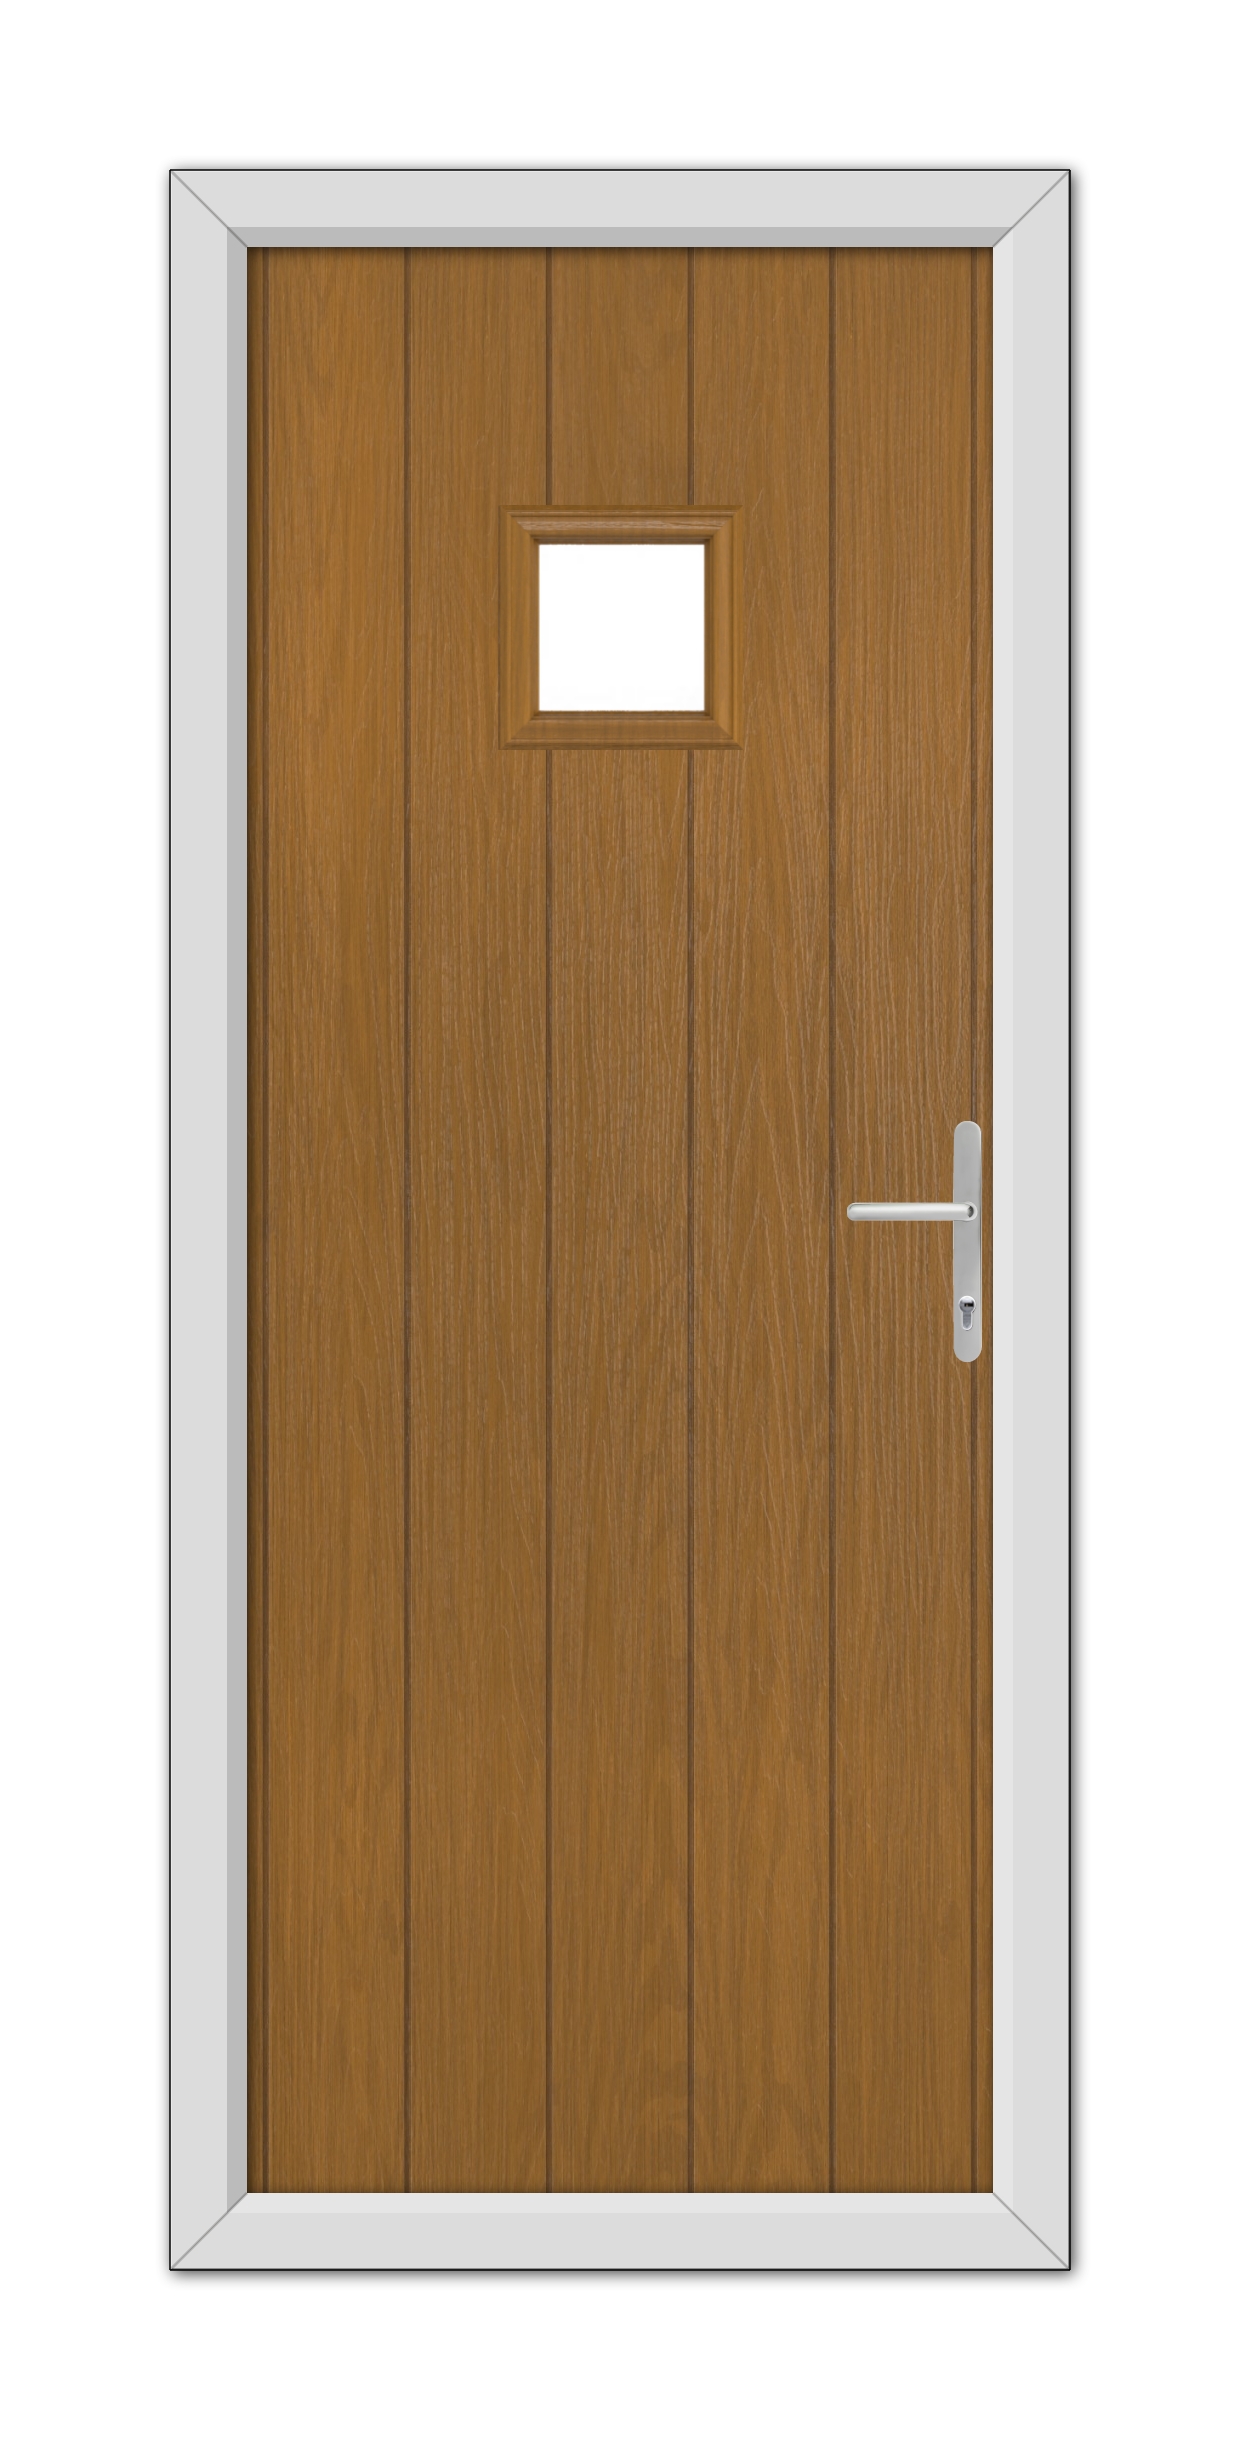 A modern Oak Brampton Composite door with a white frame, featuring a small square window at eye level and a metal handle on the right.